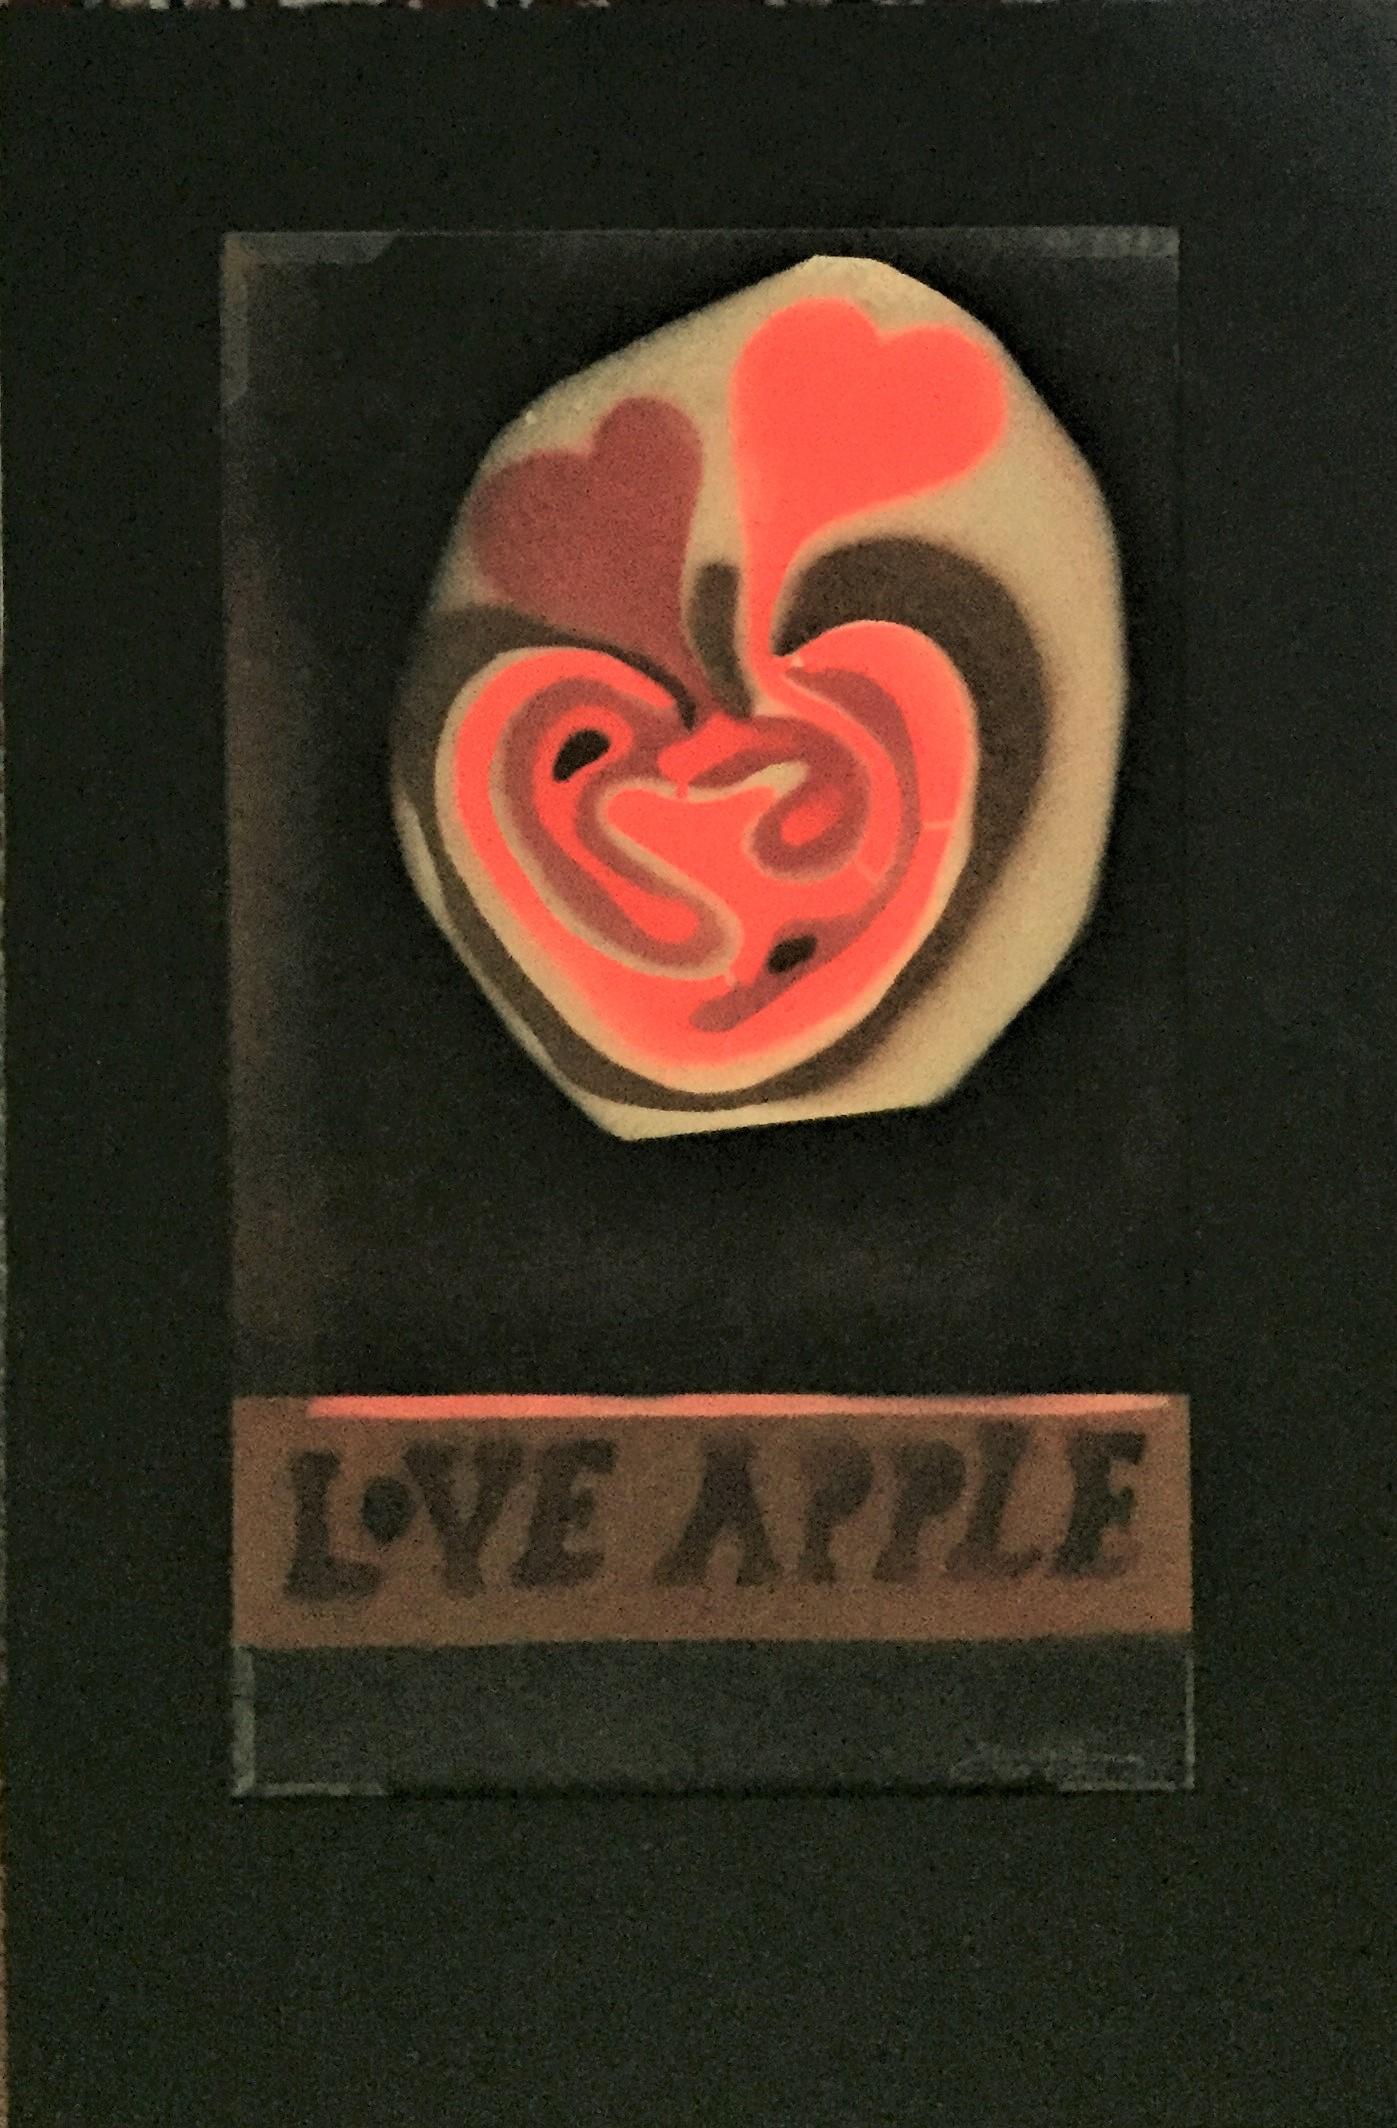 Love Apple (Black background). 1967. Linoleum cut printed in brown, red, orange, black and tan. 19 1/2 x 12 1/2 (sheet 22 1/2 x 14 3/16). A vivid impression printed on wove paper paper. Signed, dated and annotated in pencil.
Housed in a 30 x 20-inch